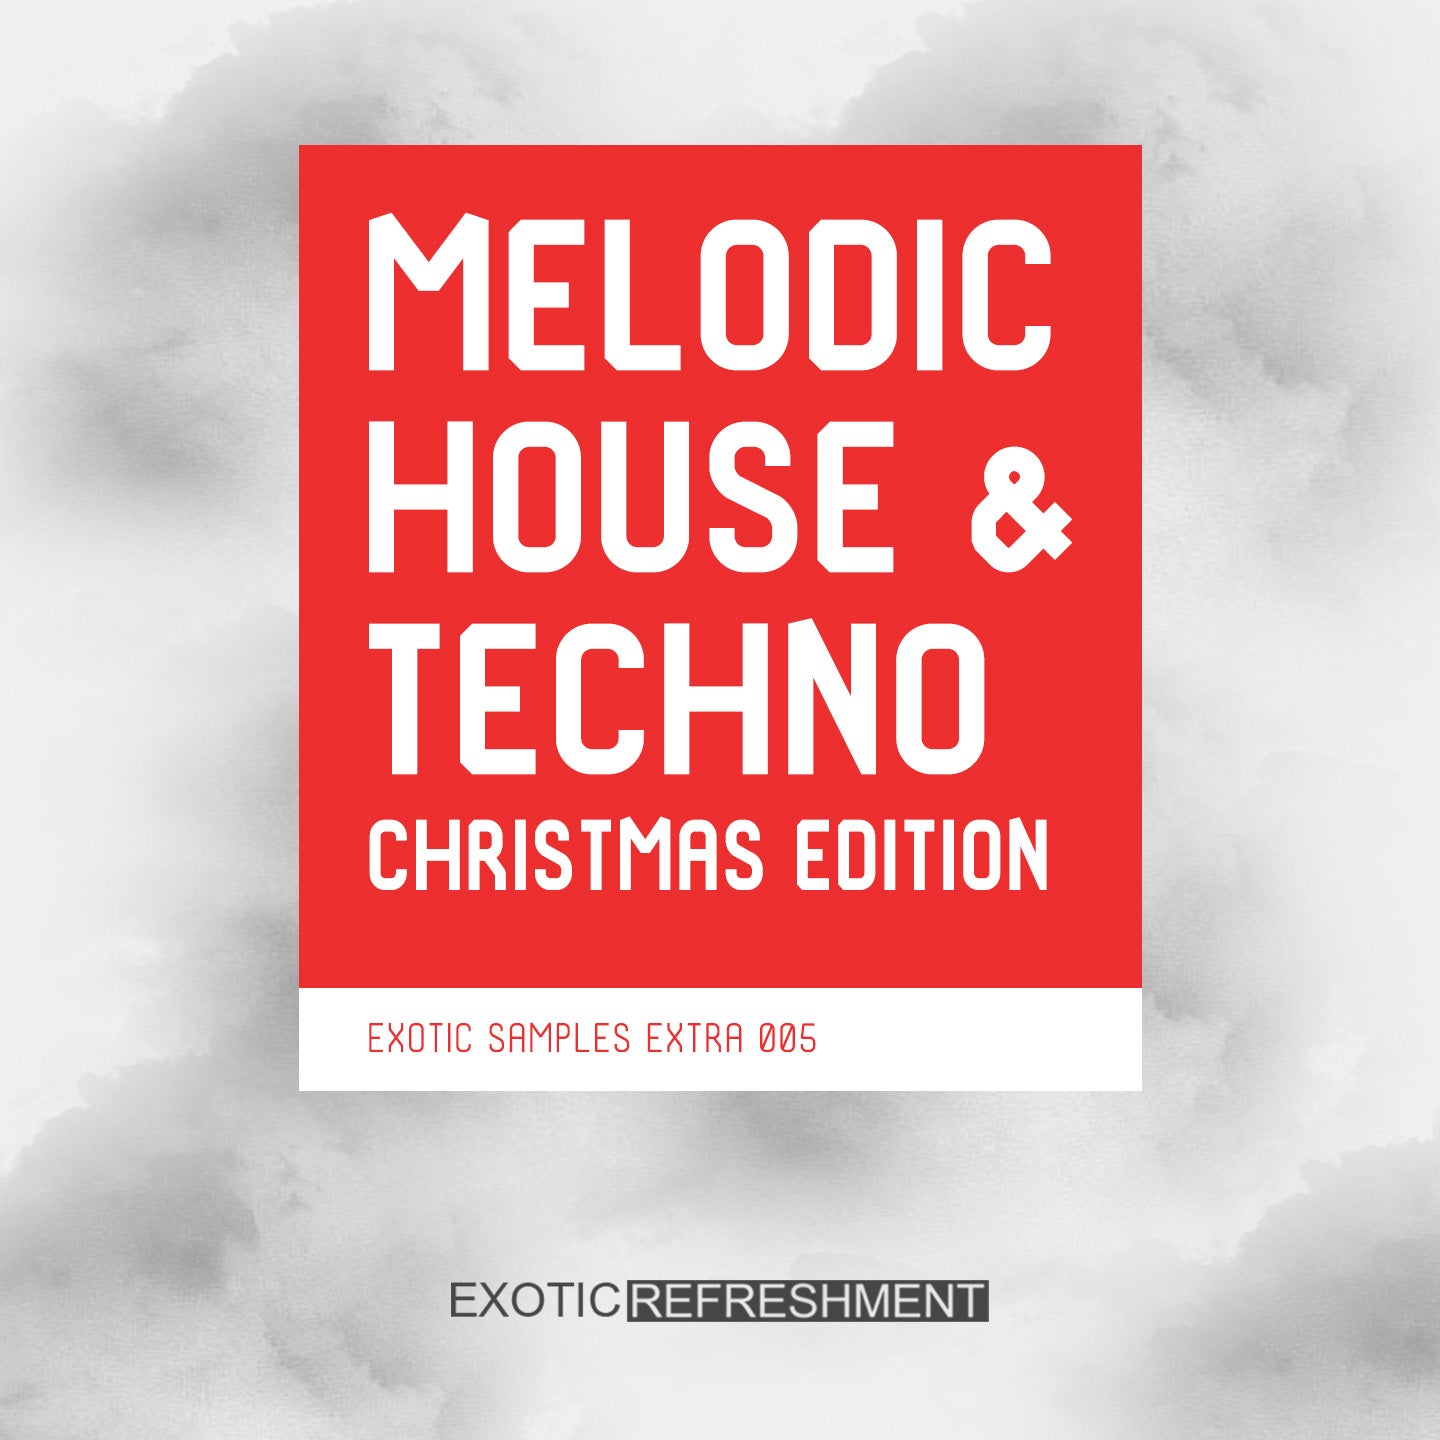 Melodic House & Techno Christmas Edition - Sample Pack